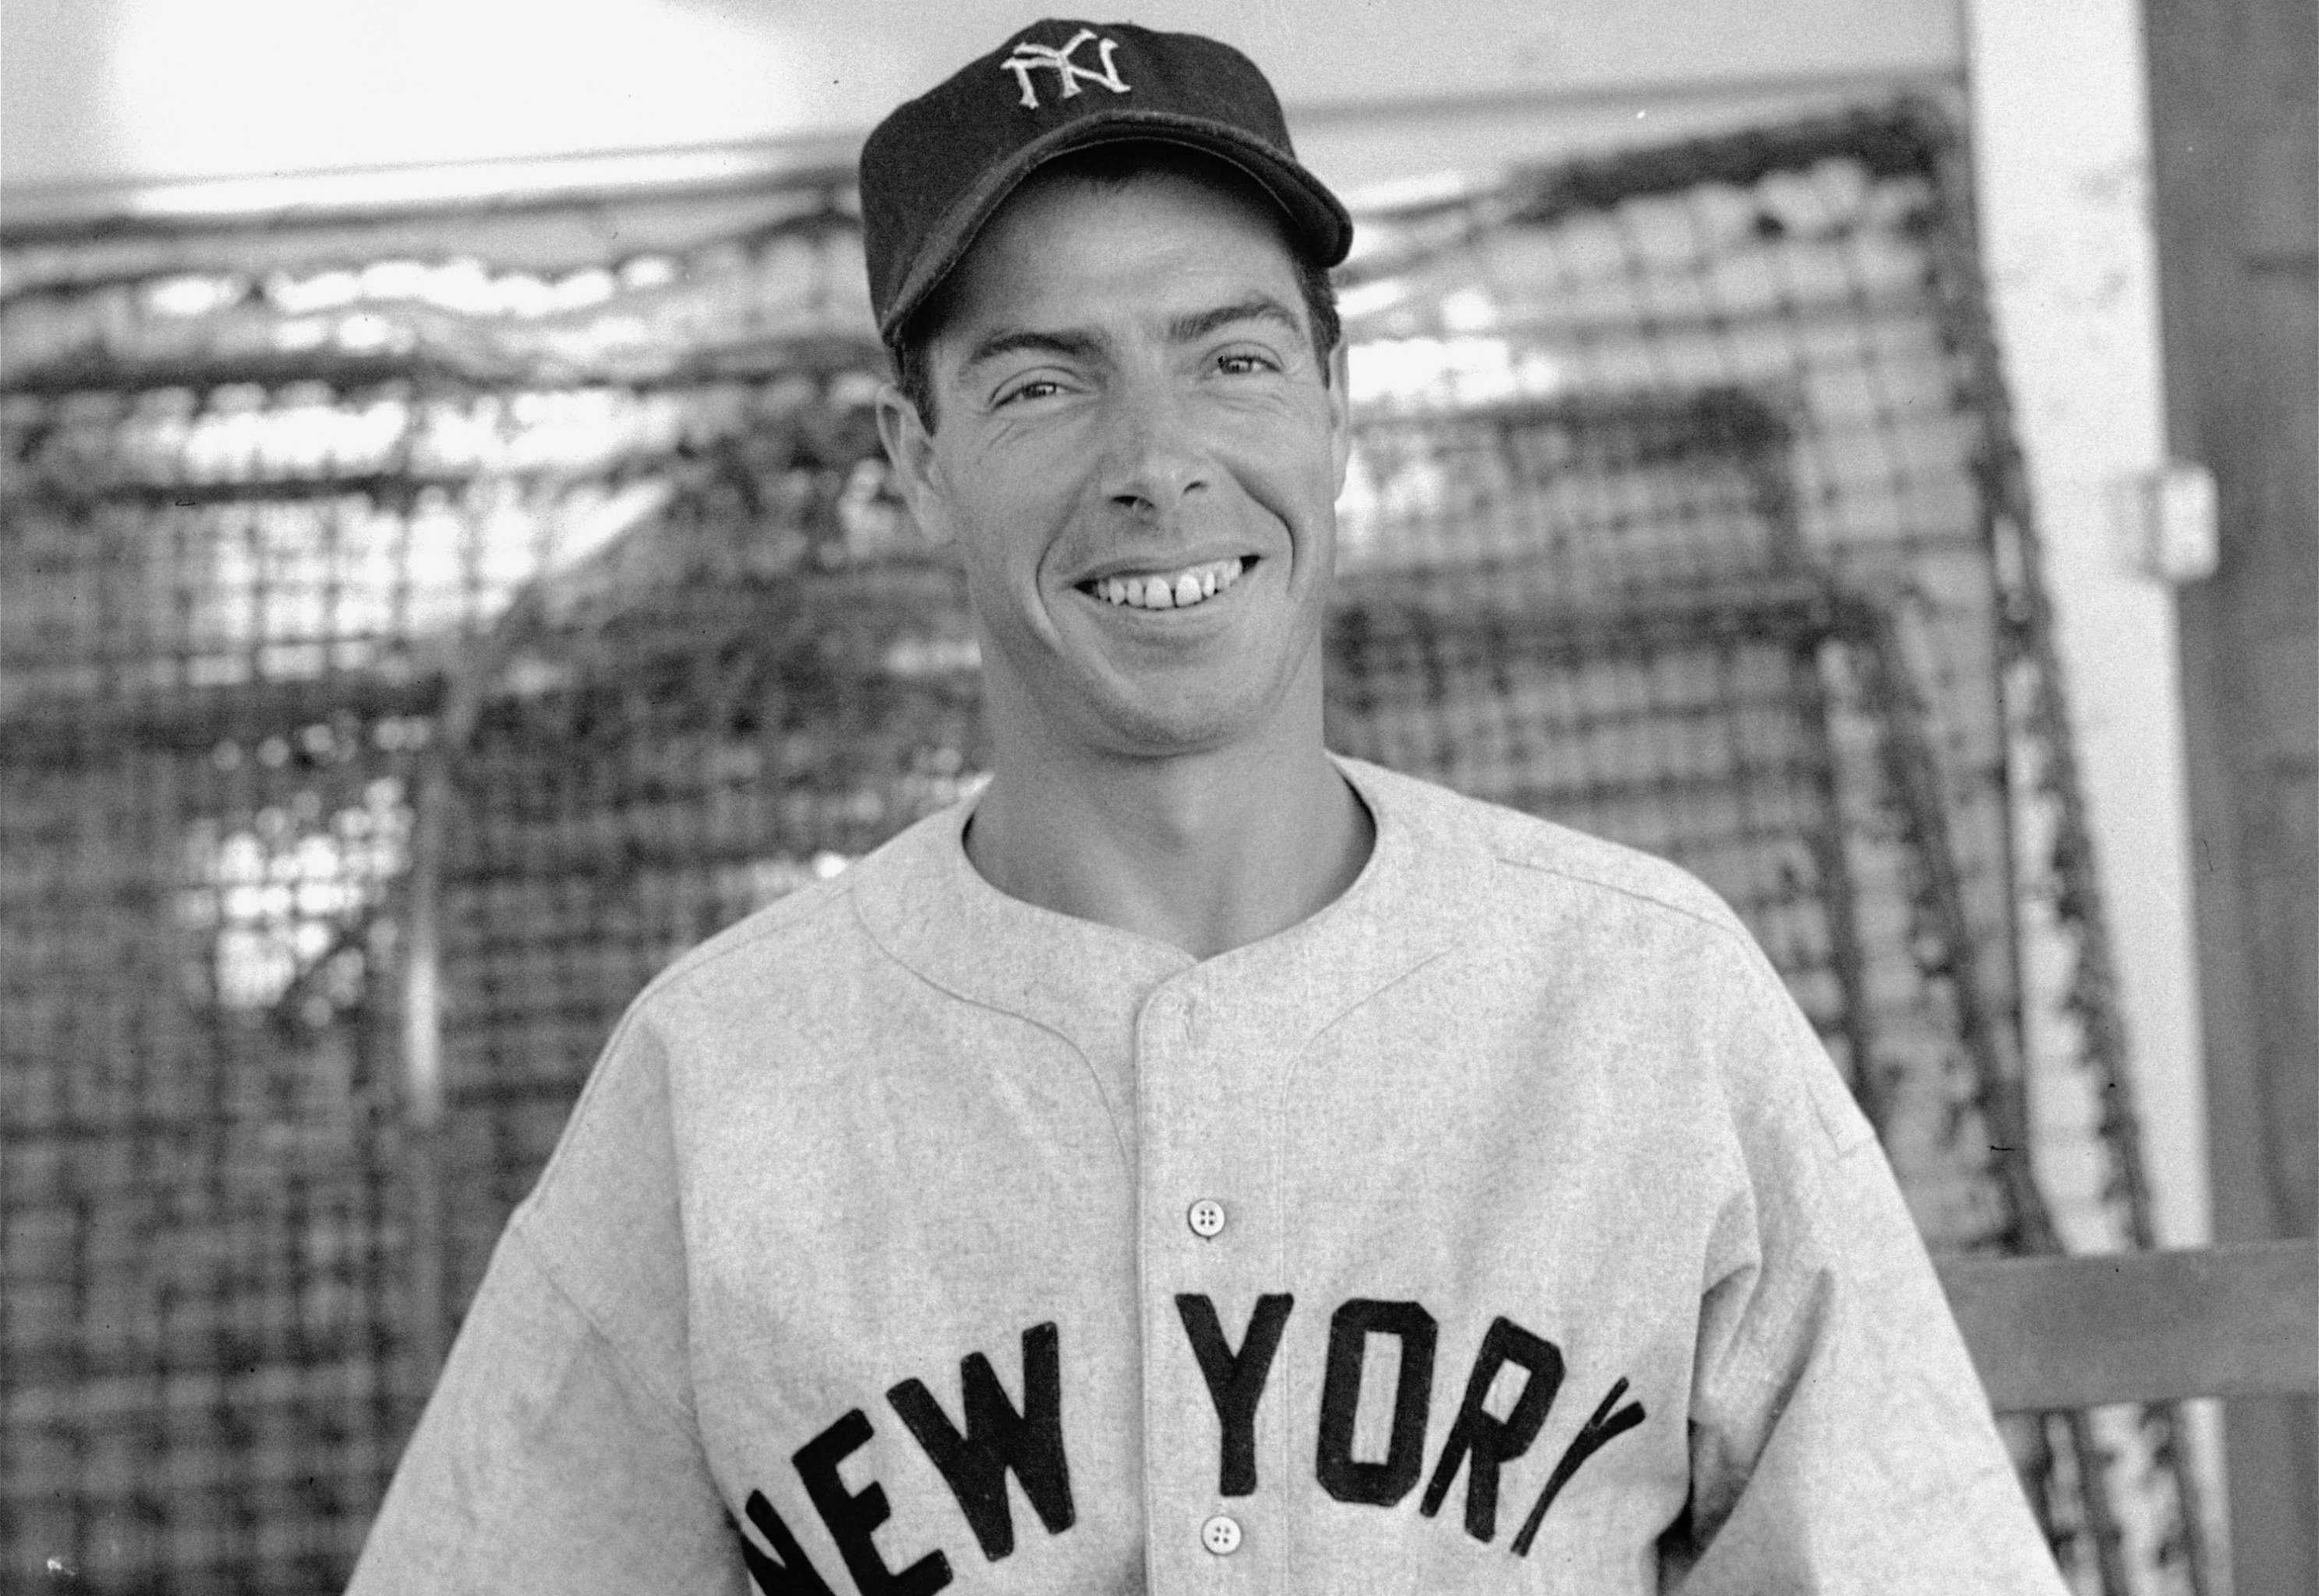 Damn Yankees!: The Most Memorable Appearances by NY Yankee Players